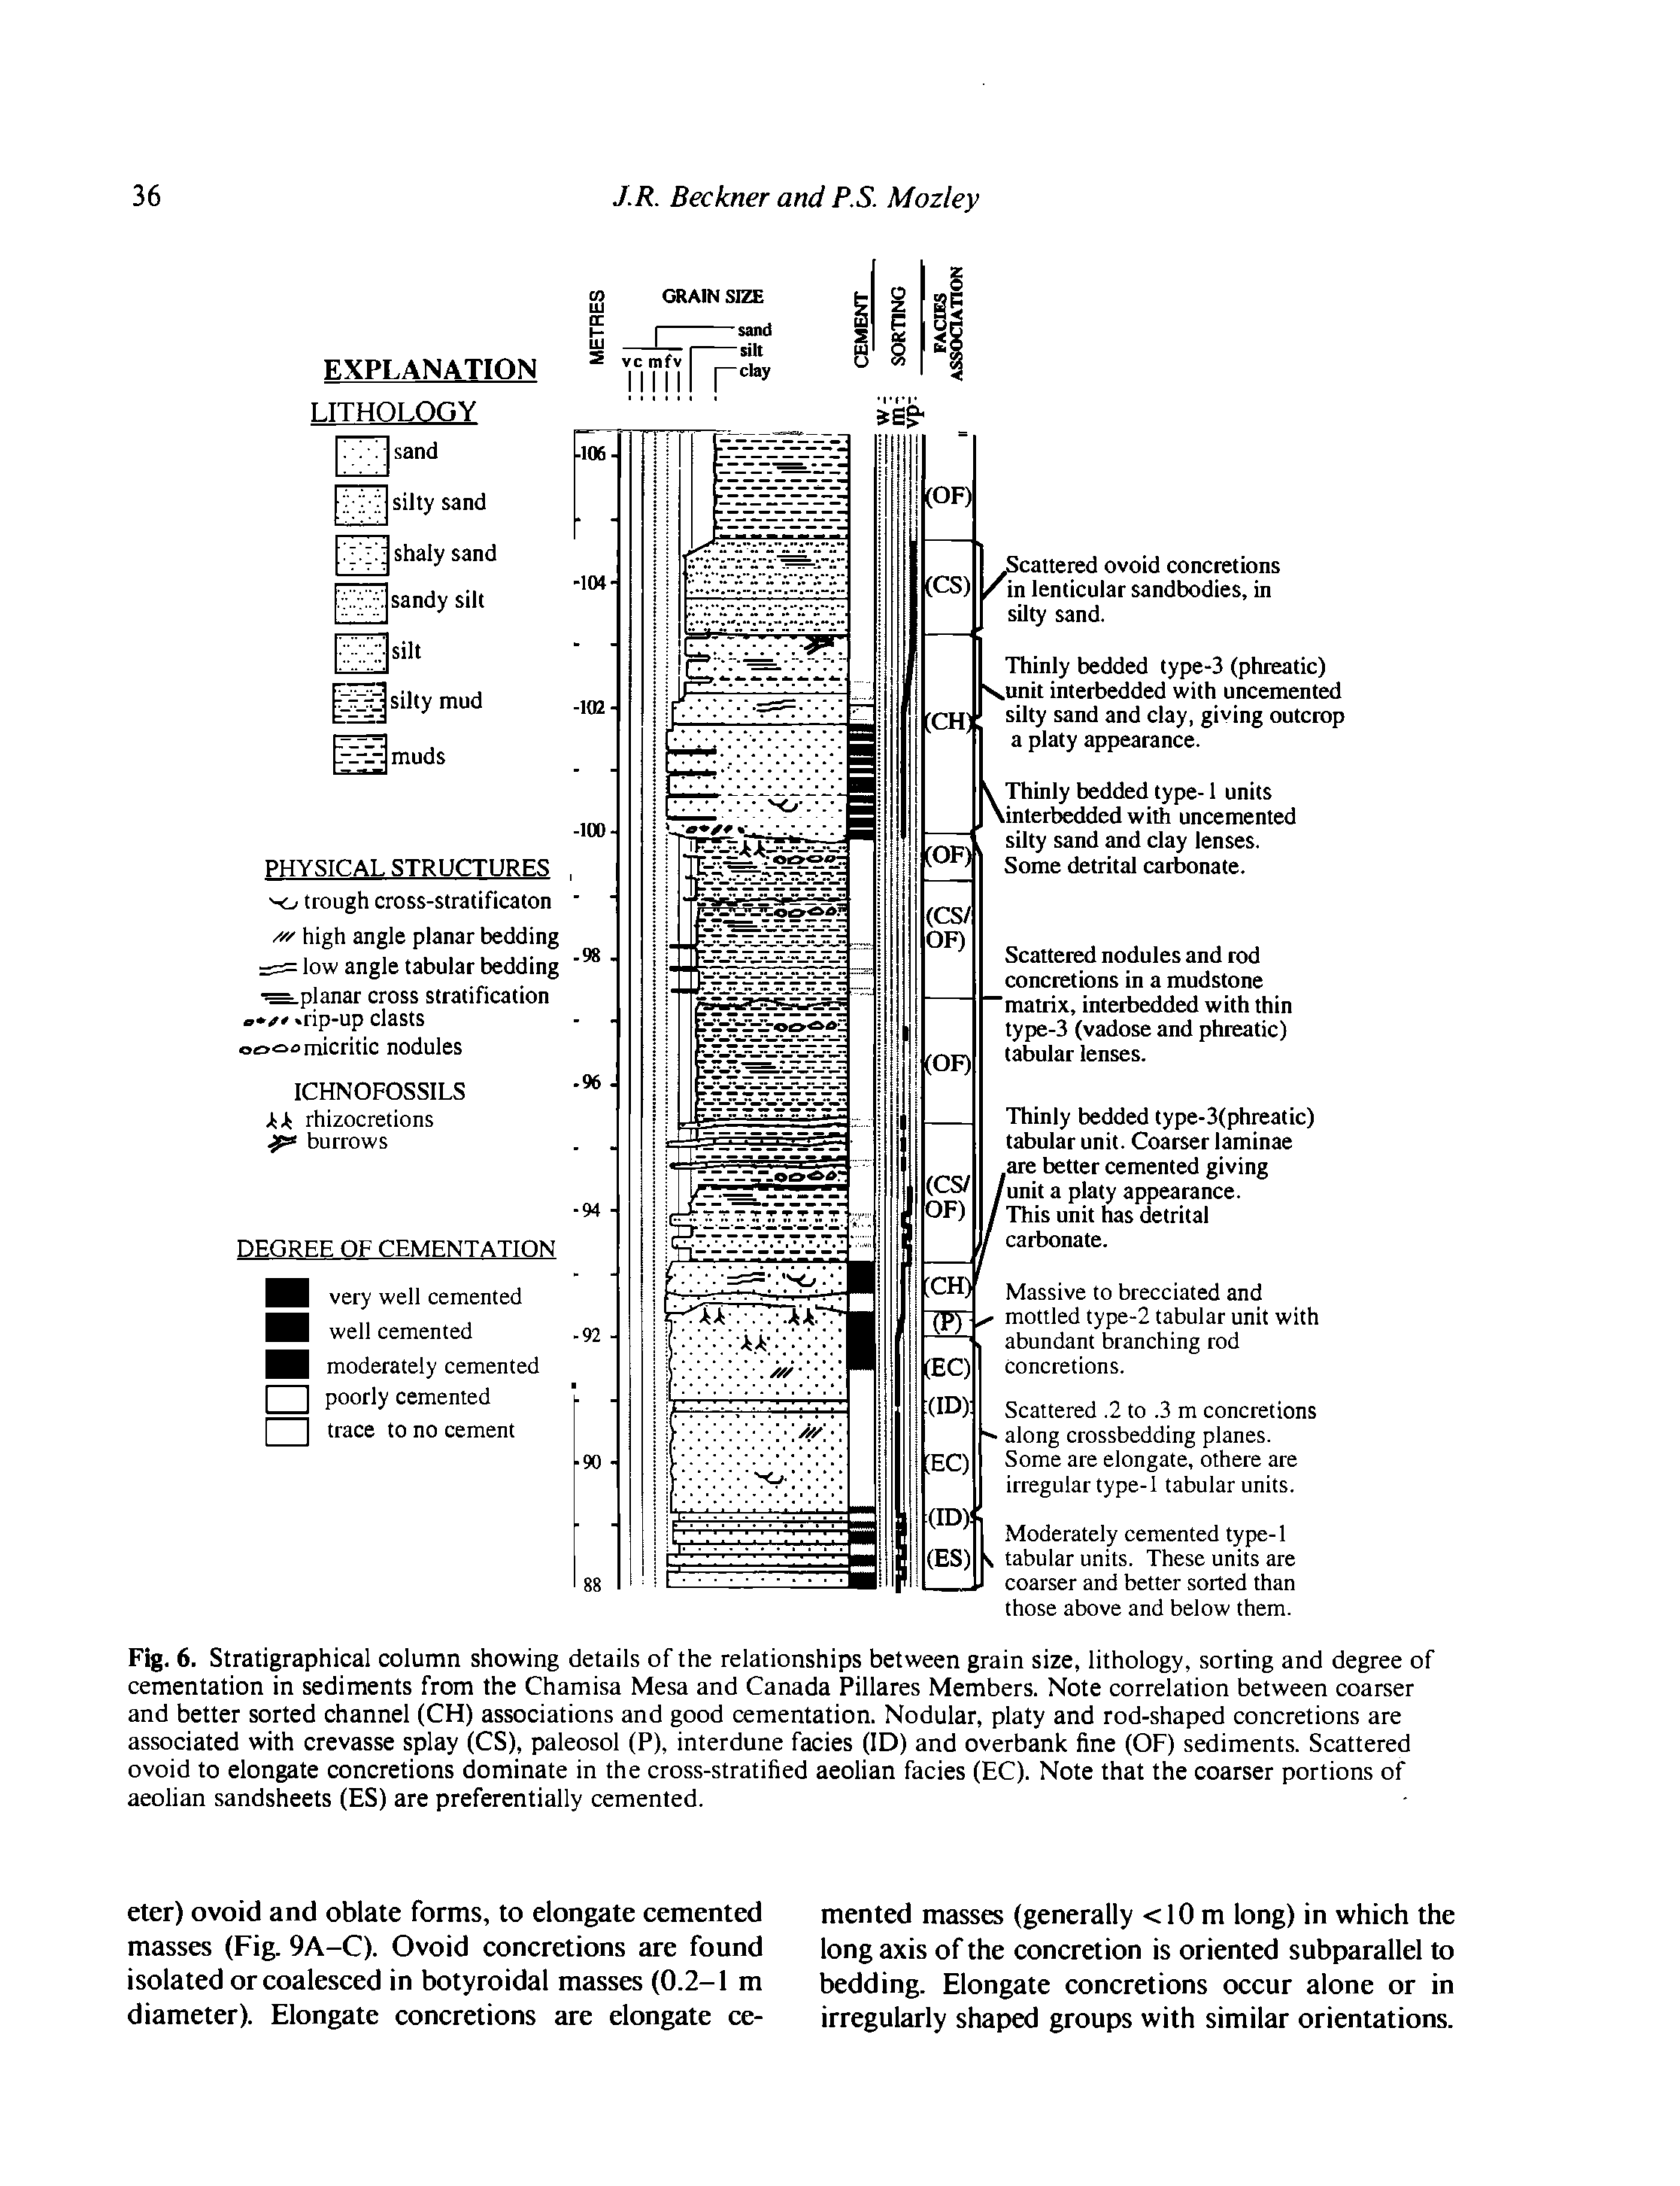 Fig. 6. Stratigraphical column showing details of the relationships between grain size, lithology, sorting and degree of cementation in sediments from the Chamisa Mesa and Canada Pillares Members. Note correlation between coarser and better sorted channel (CH) associations and good cementation. Nodular, platy and rod-shaped concretions are associated with crevasse splay (CS), paleosol (P), interdune facies (ID) and overbank fine (OF) sediments. Scattered ovoid to elongate concretions dominate in the cross-stratified aeolian facies (EC). Note that the coarser portions of aeolian sandsheets (ES) are preferentially cemented.